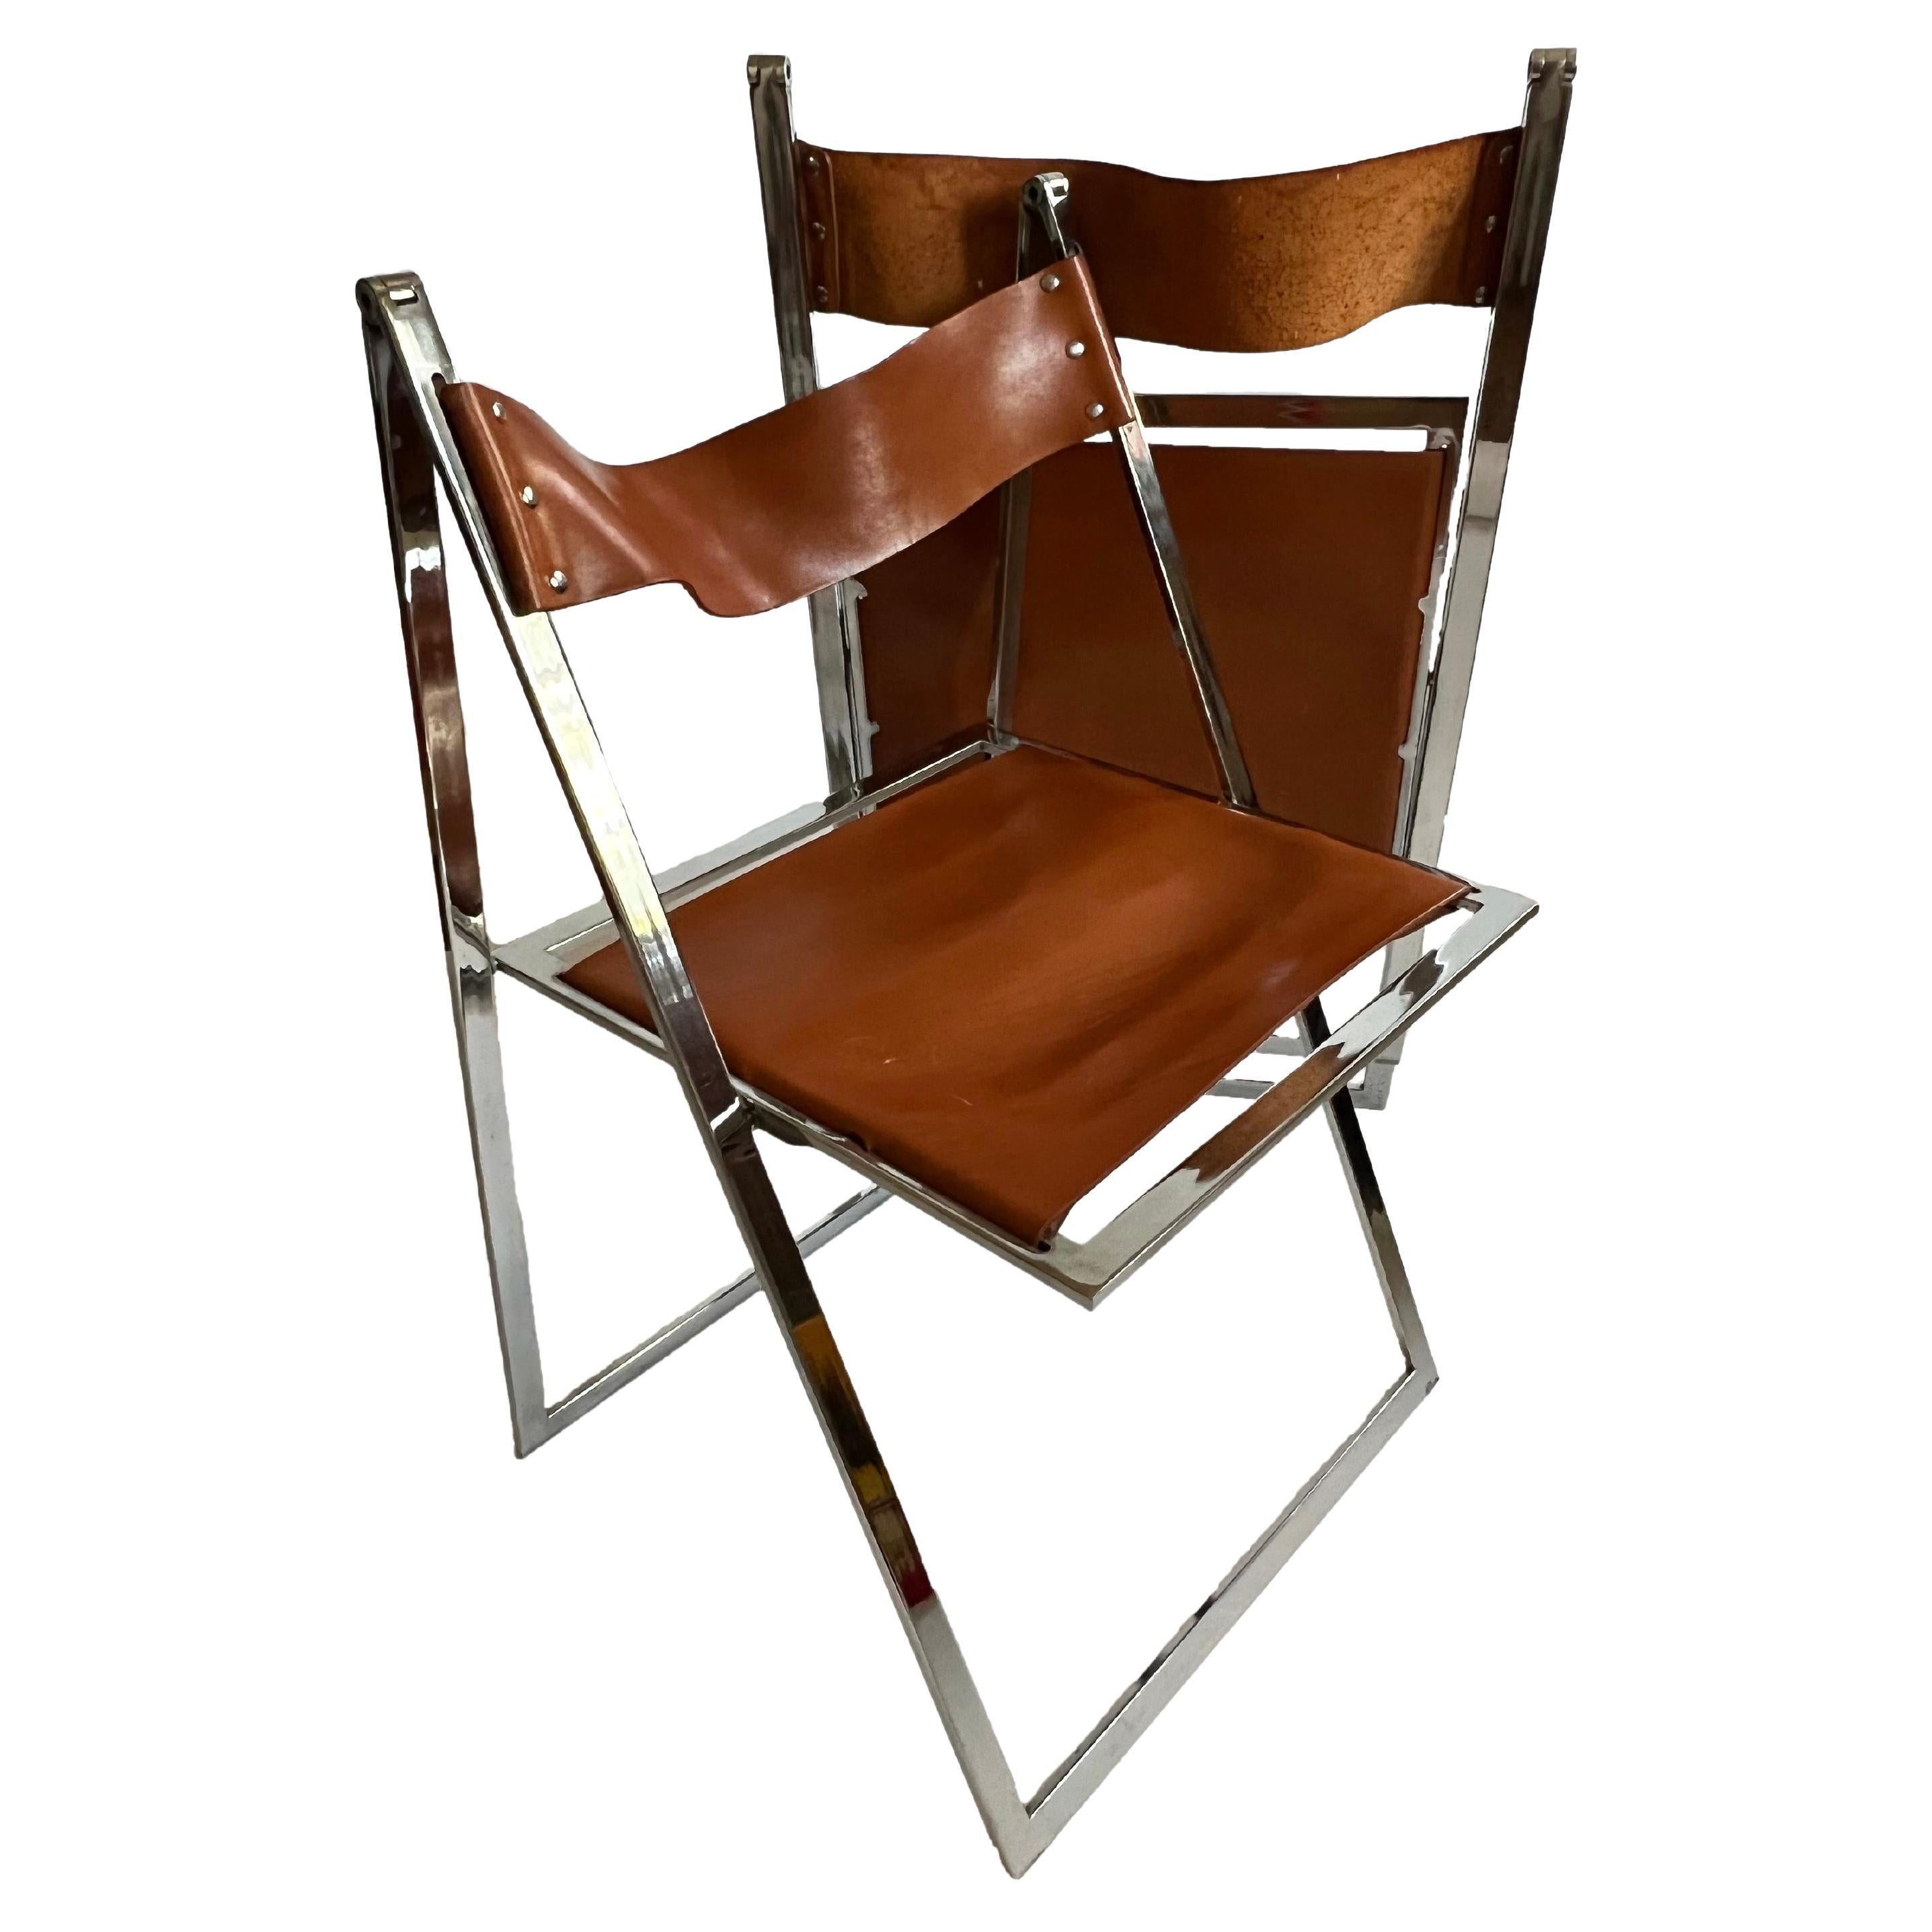 Fontoni and Geraci "Elios" Folding Chairs For Sale at 1stDibs